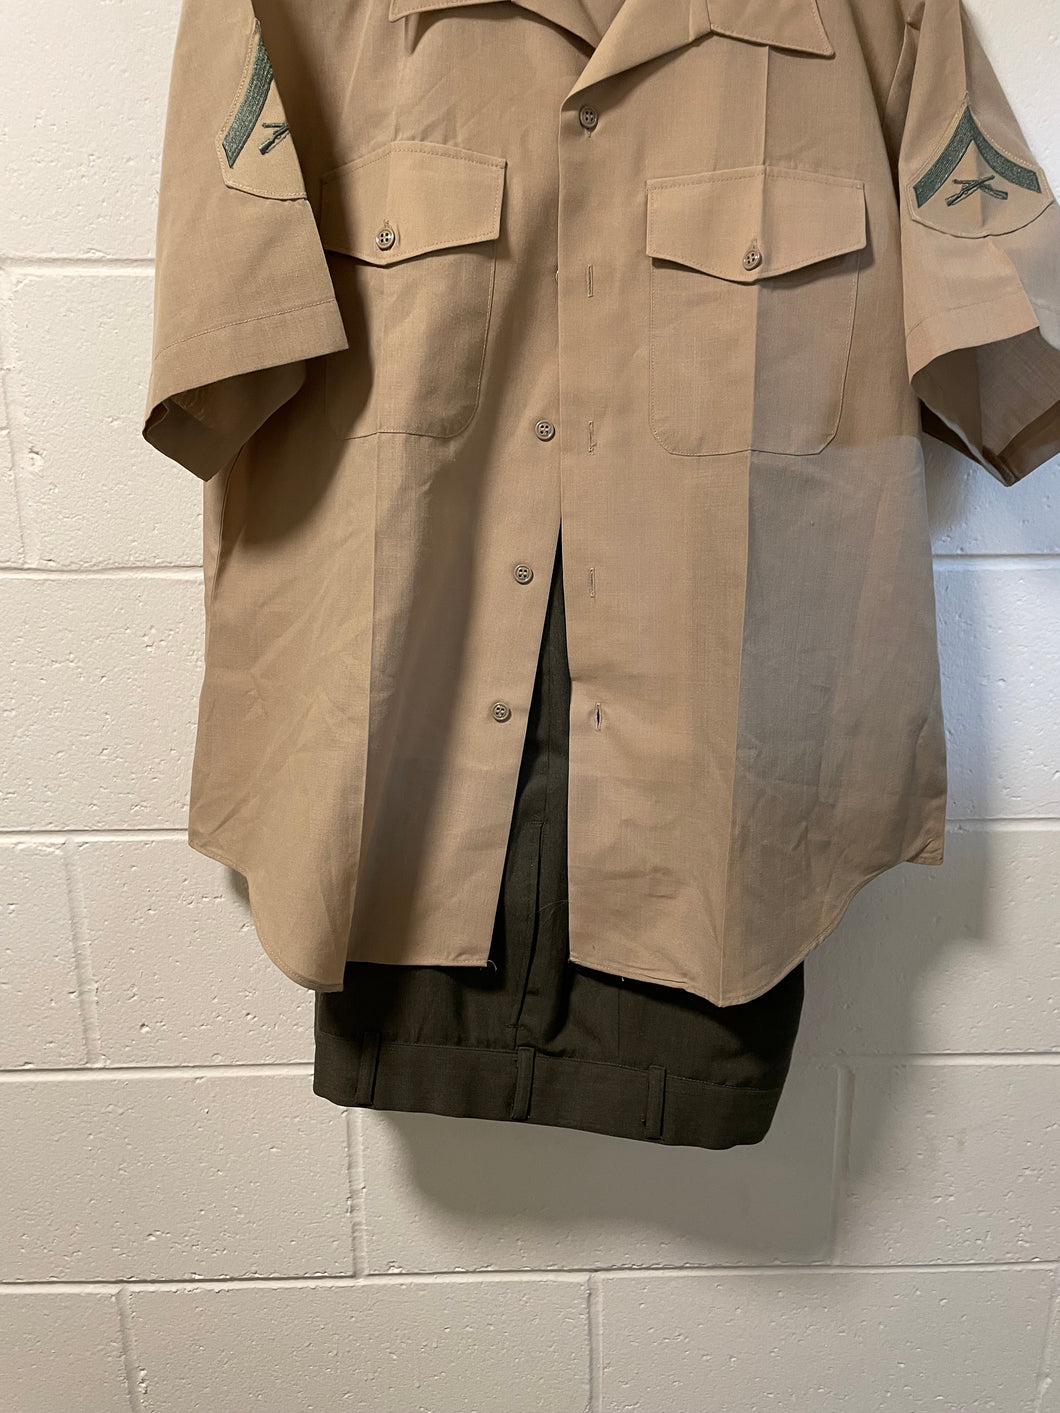 FRONT VIEW OF MARINE CORPS UNIFORM SHIRT AND PANTS